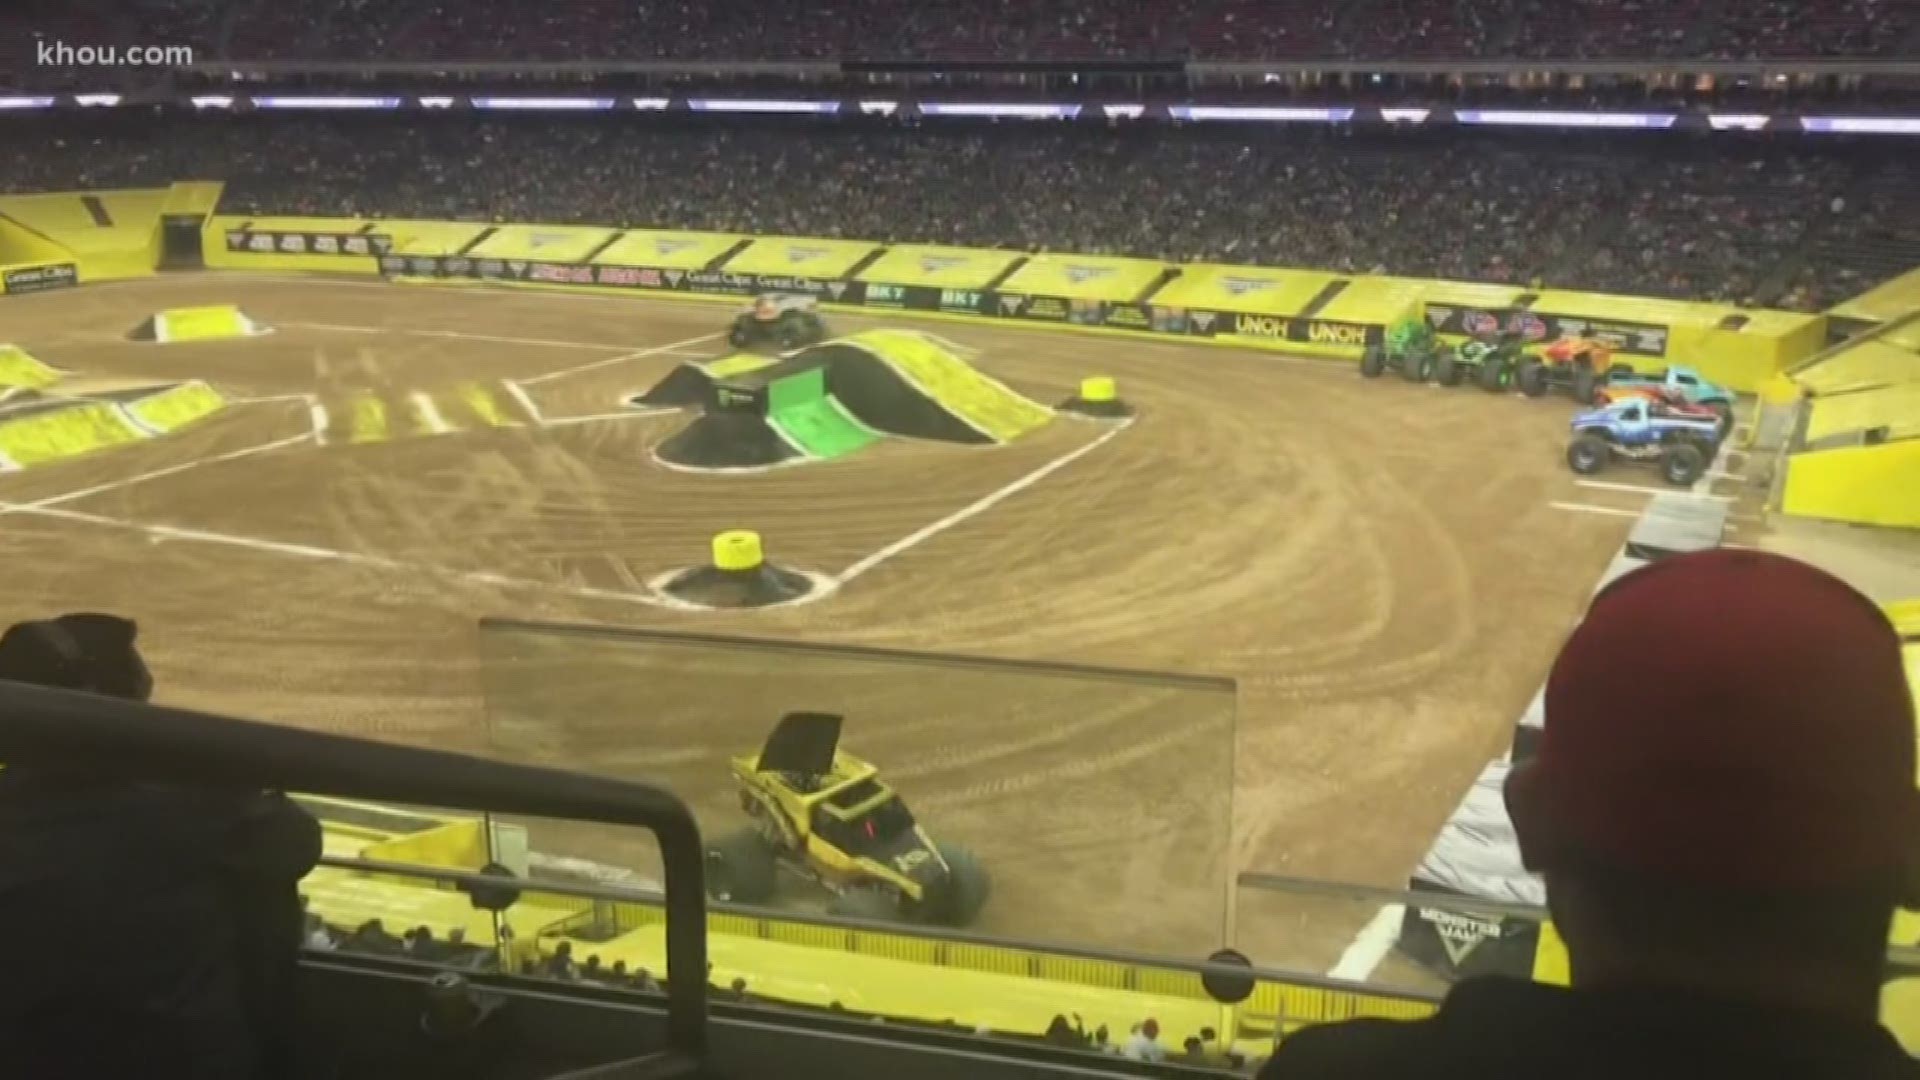 A javelin-like piece of debris went flying off a monster truck and into the crowd during Sunday's show at NRG Stadium.